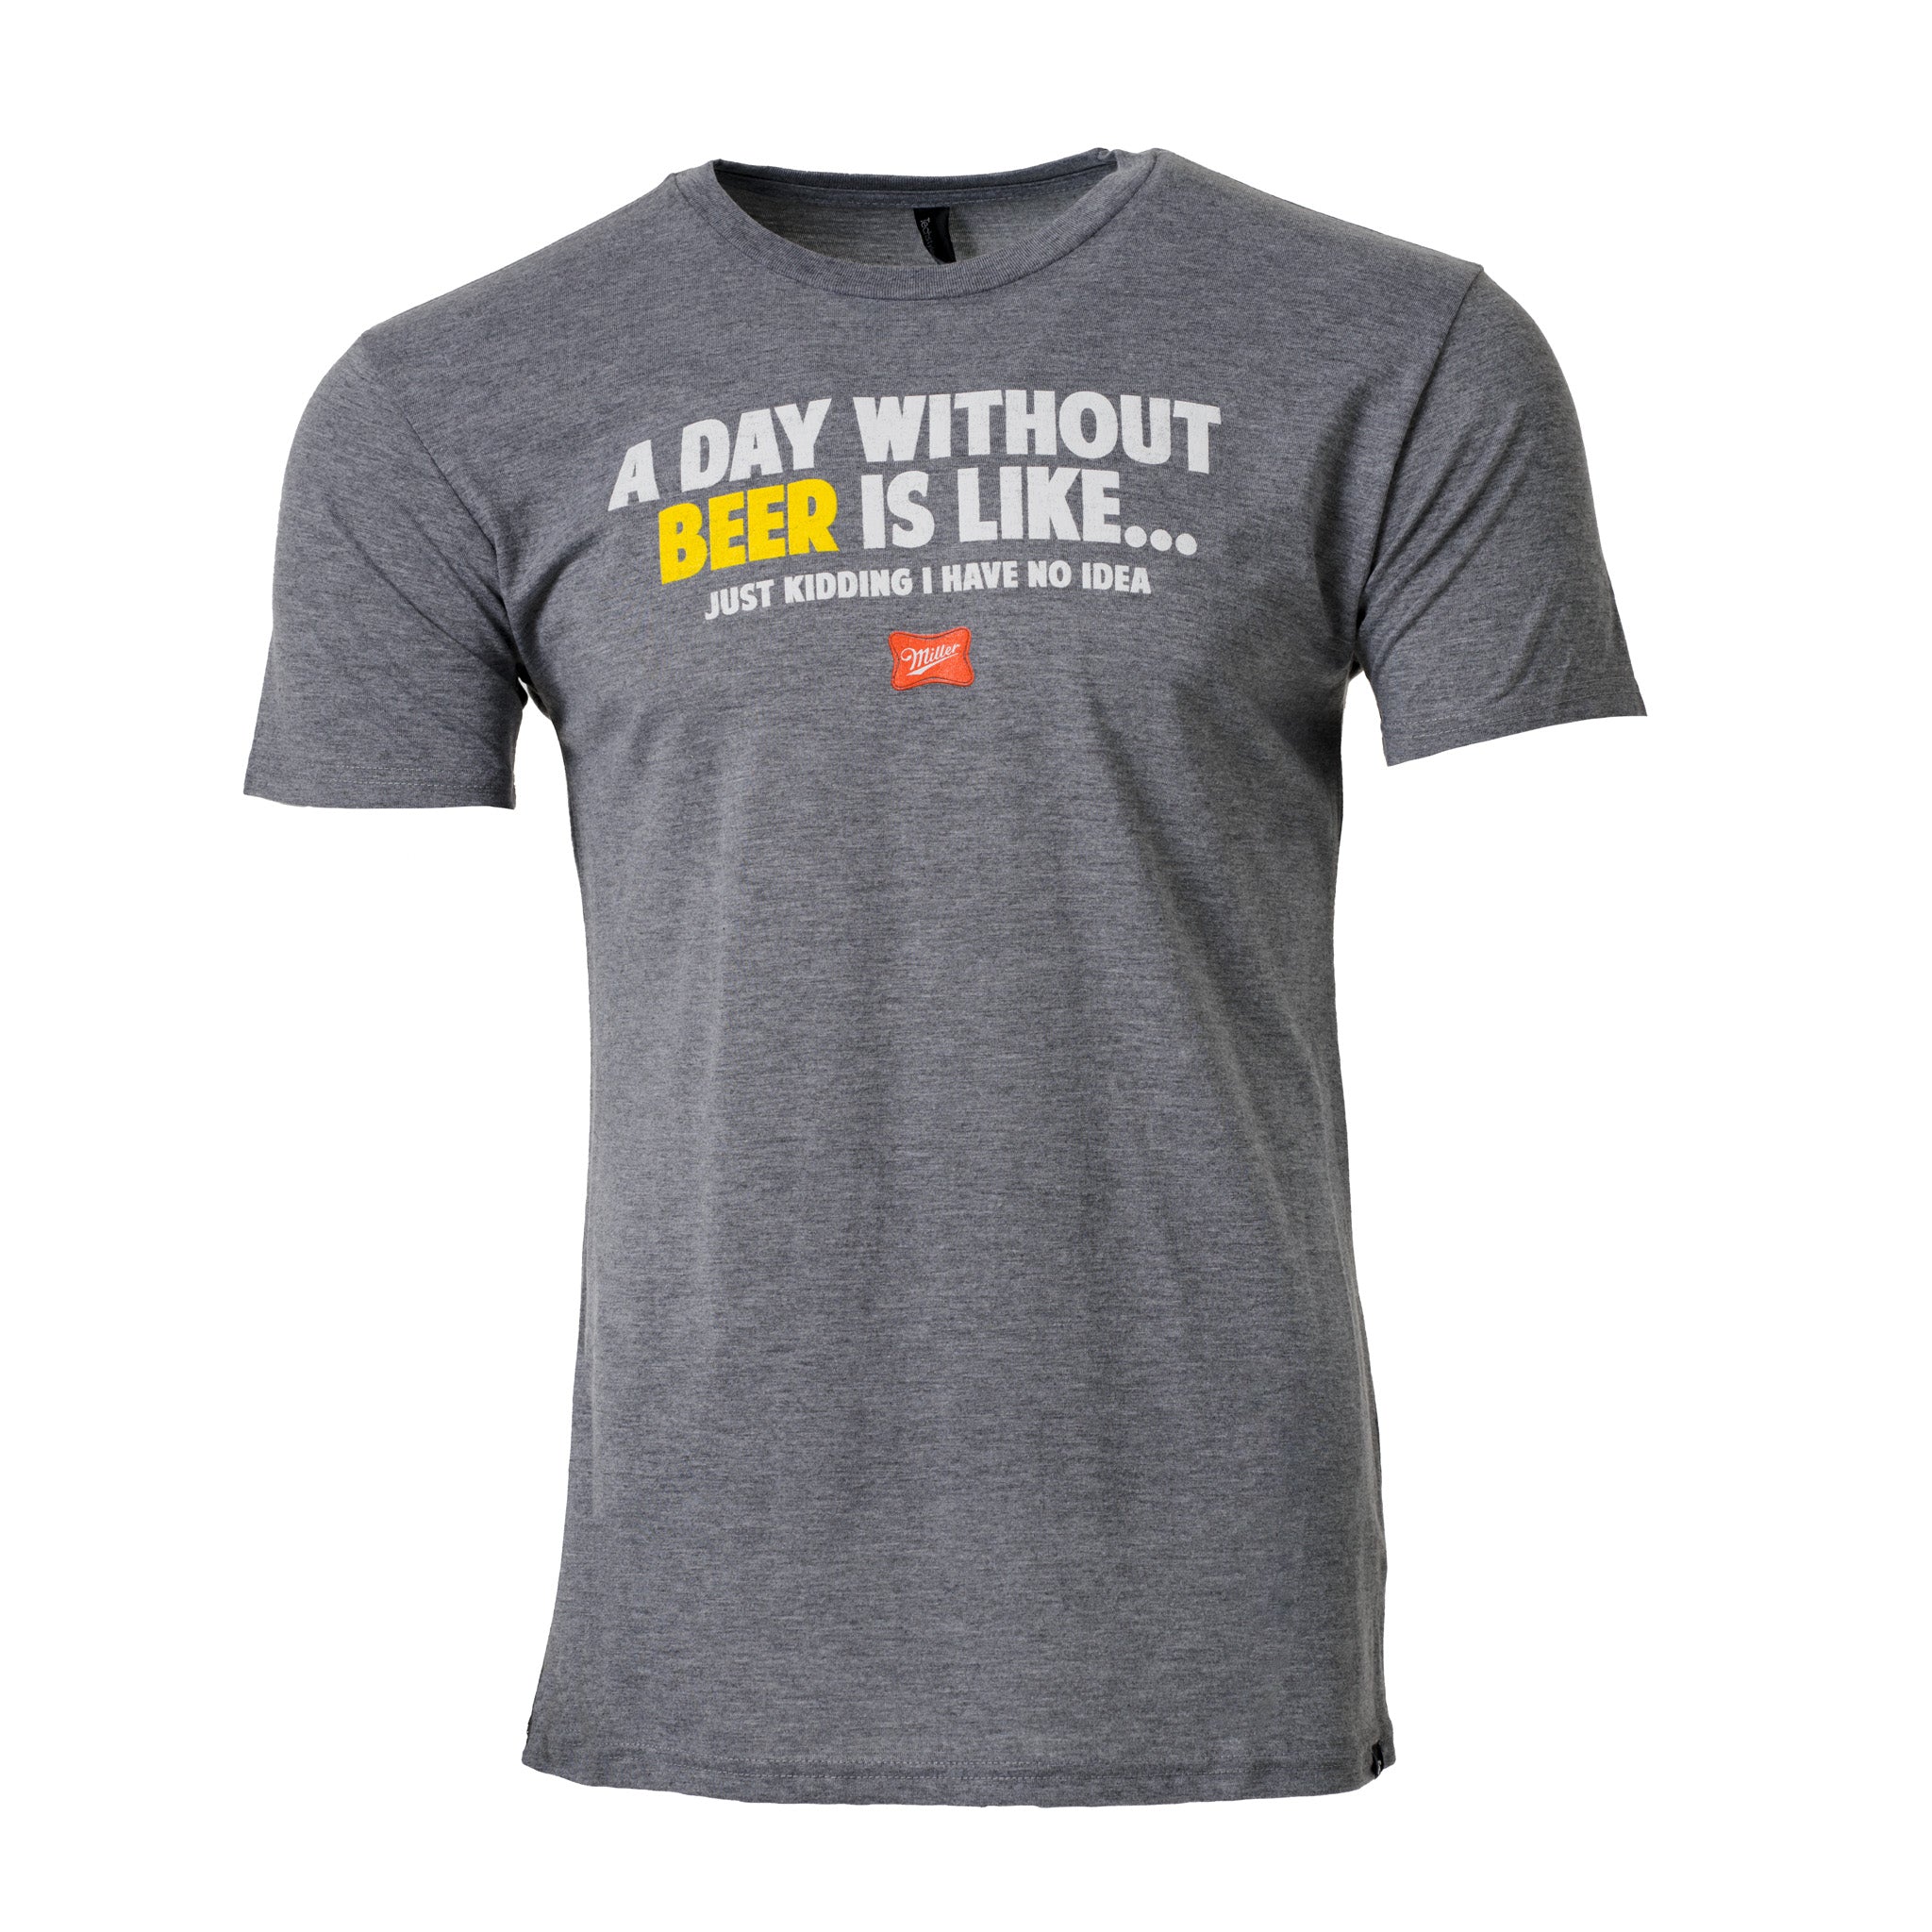 MILLER 'A DAY WITHOUT' UNISEX TEE